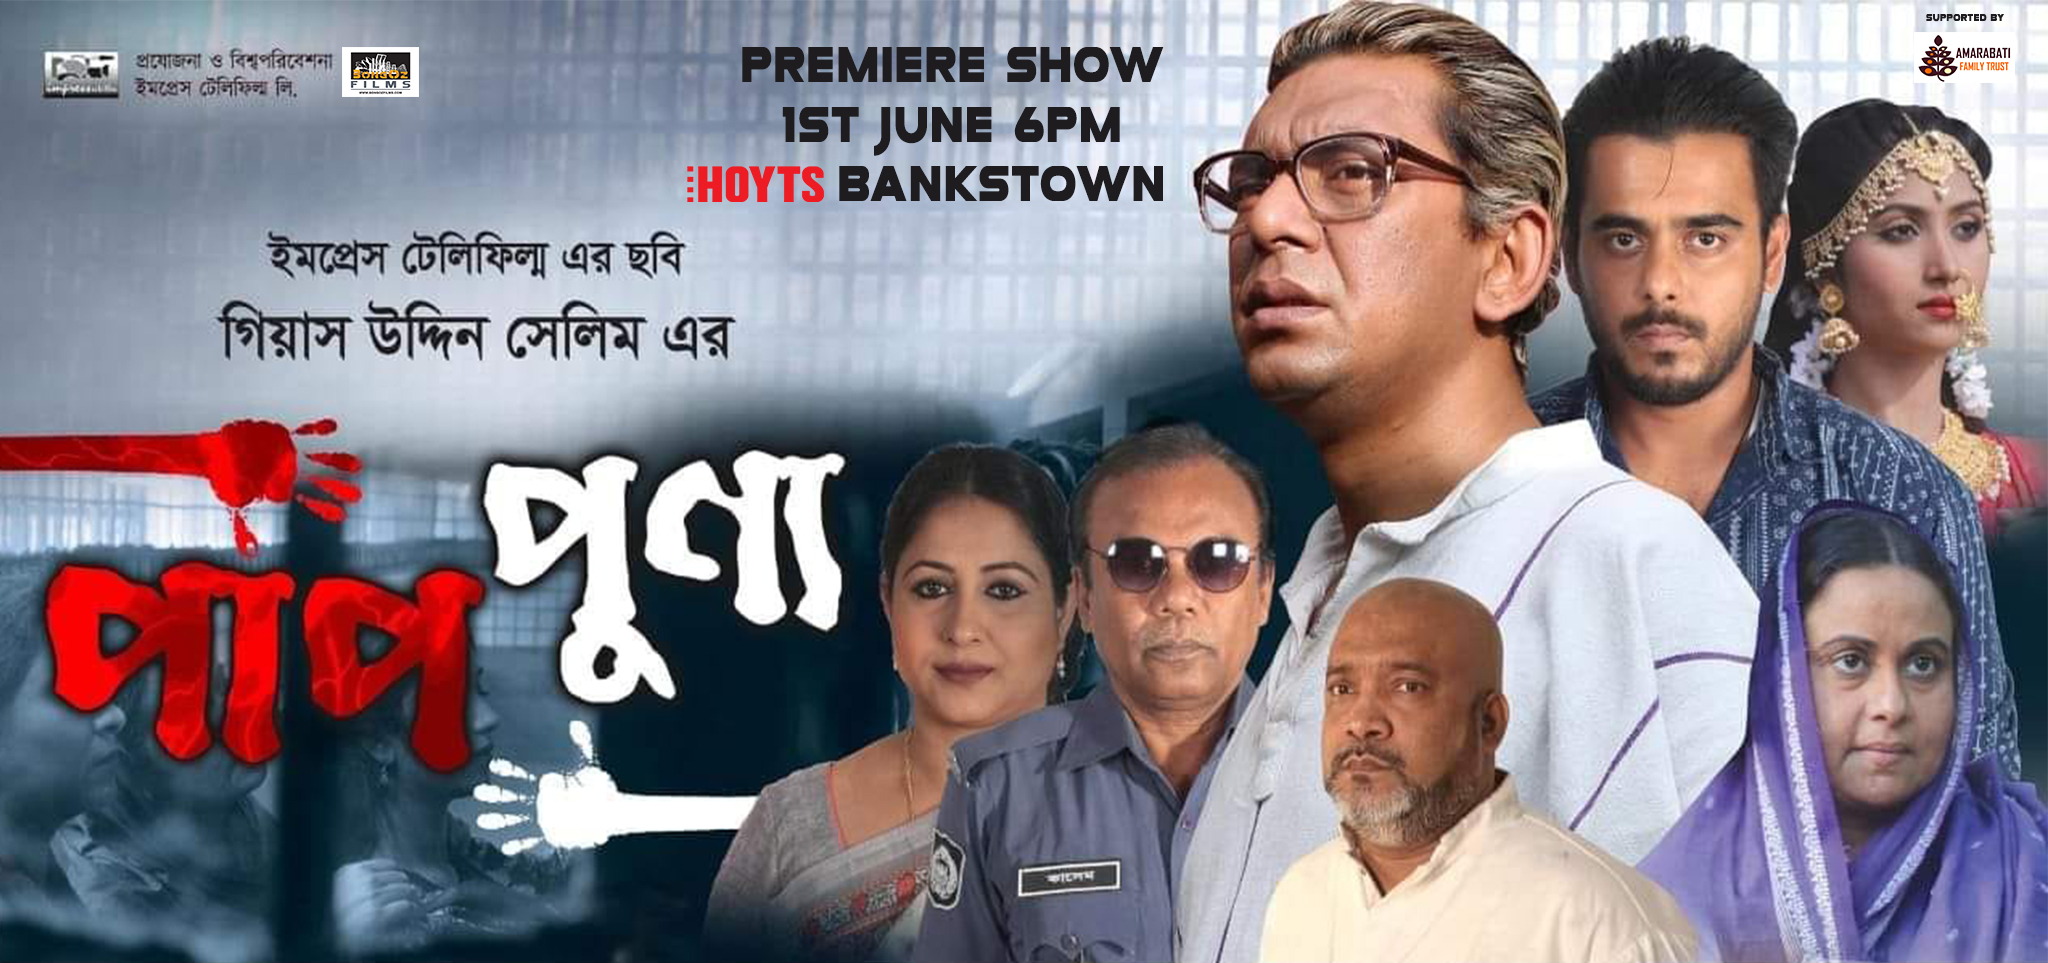 Premiere show of Paap Punno in Australia - test